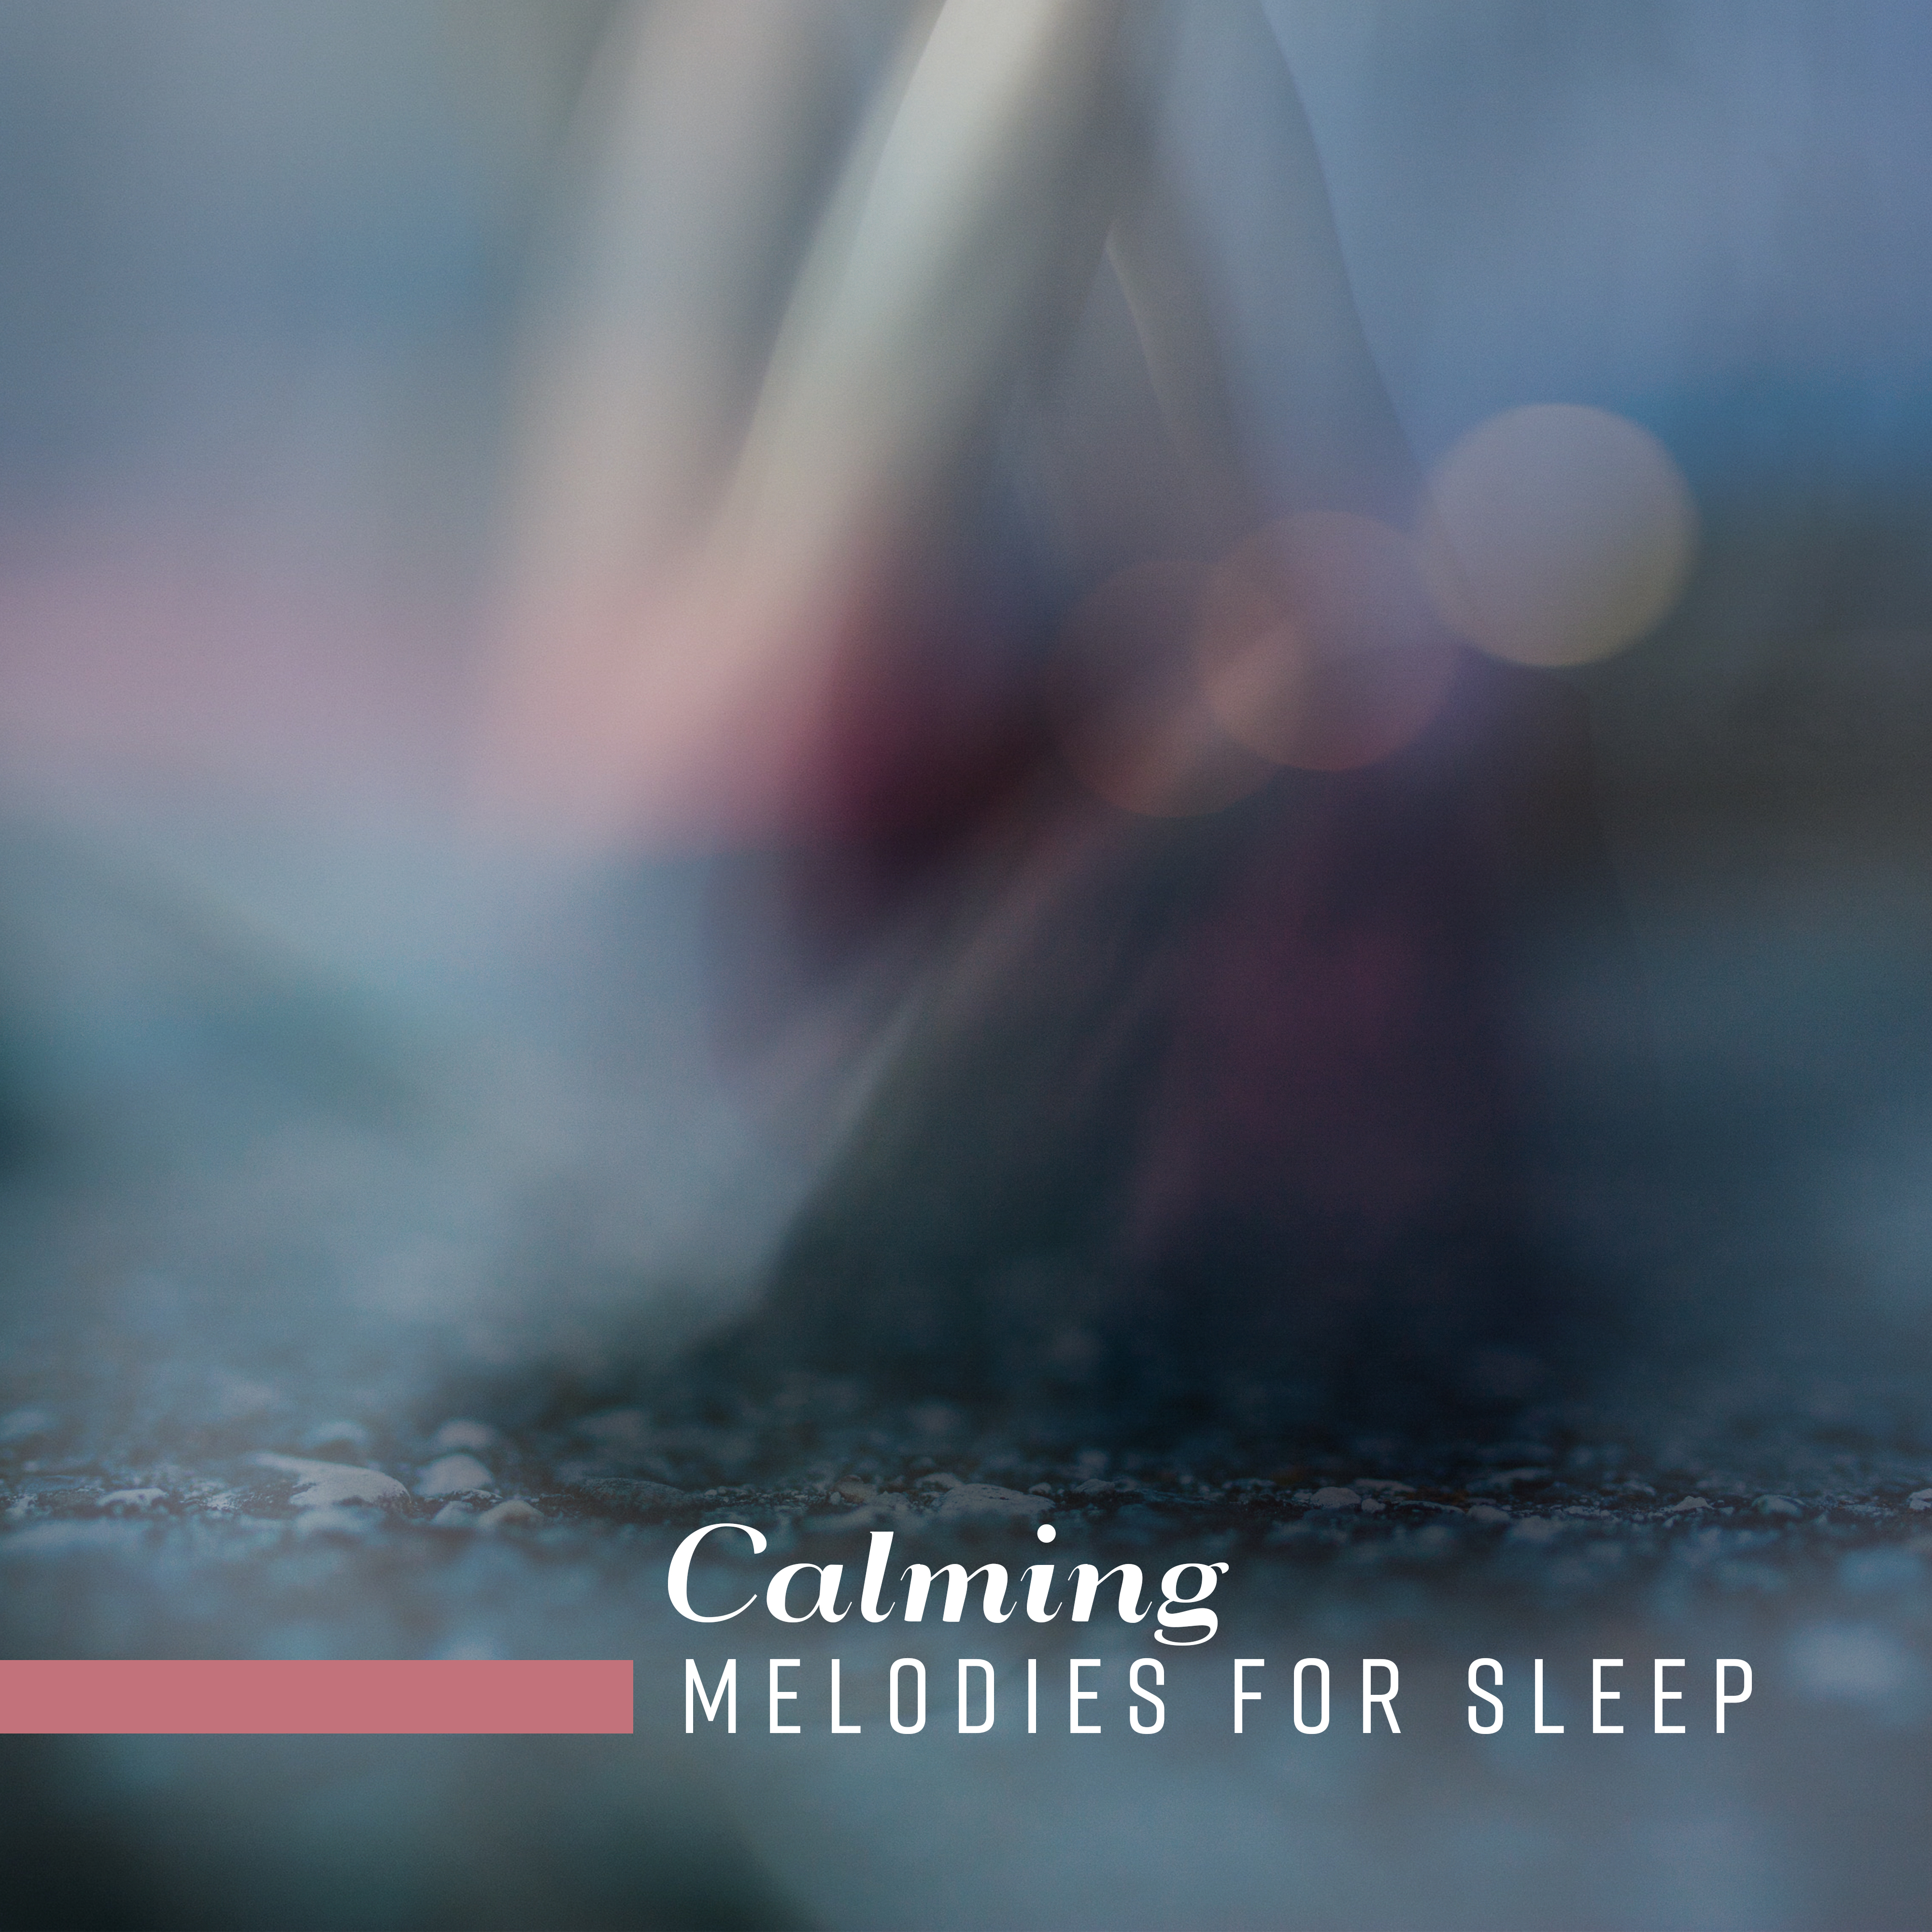 Calming Melodies for Sleep